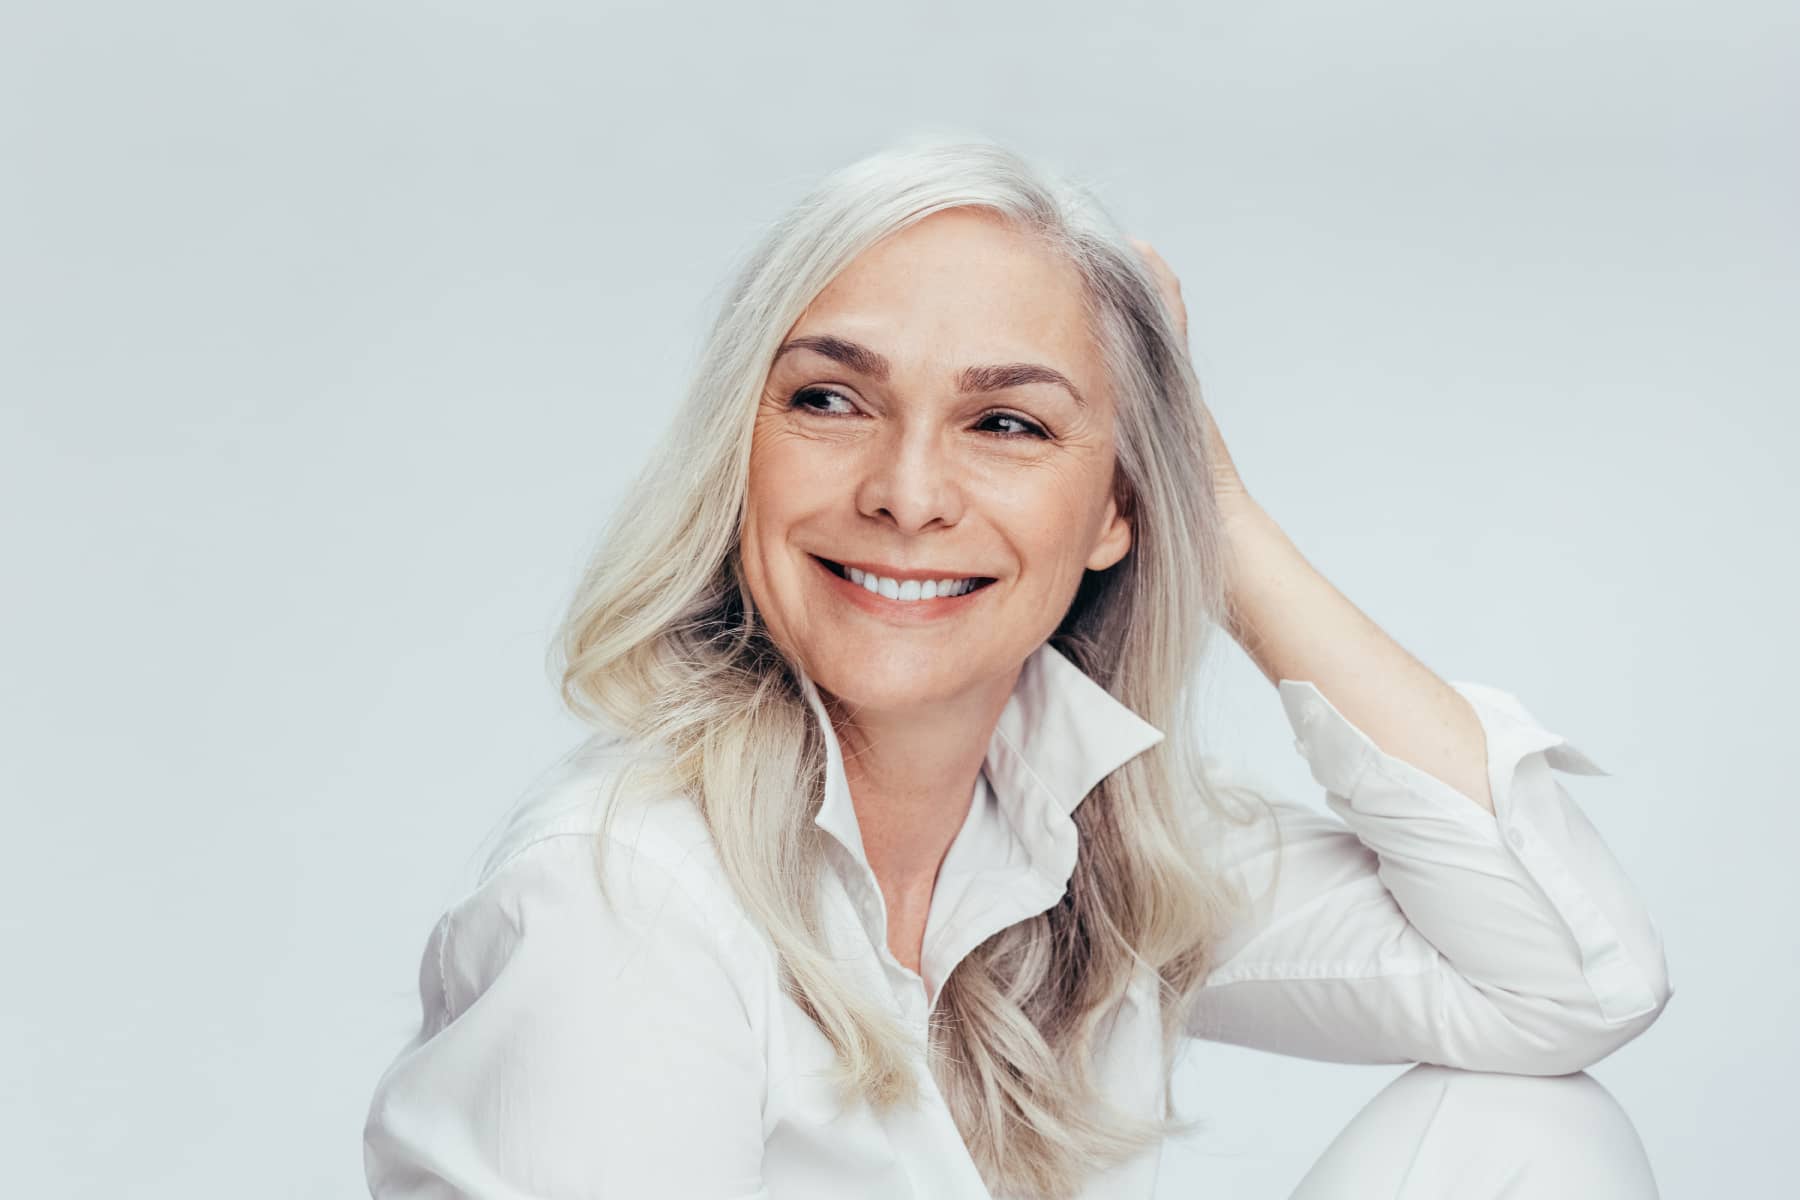 What Is The Best Age For A Facelift?